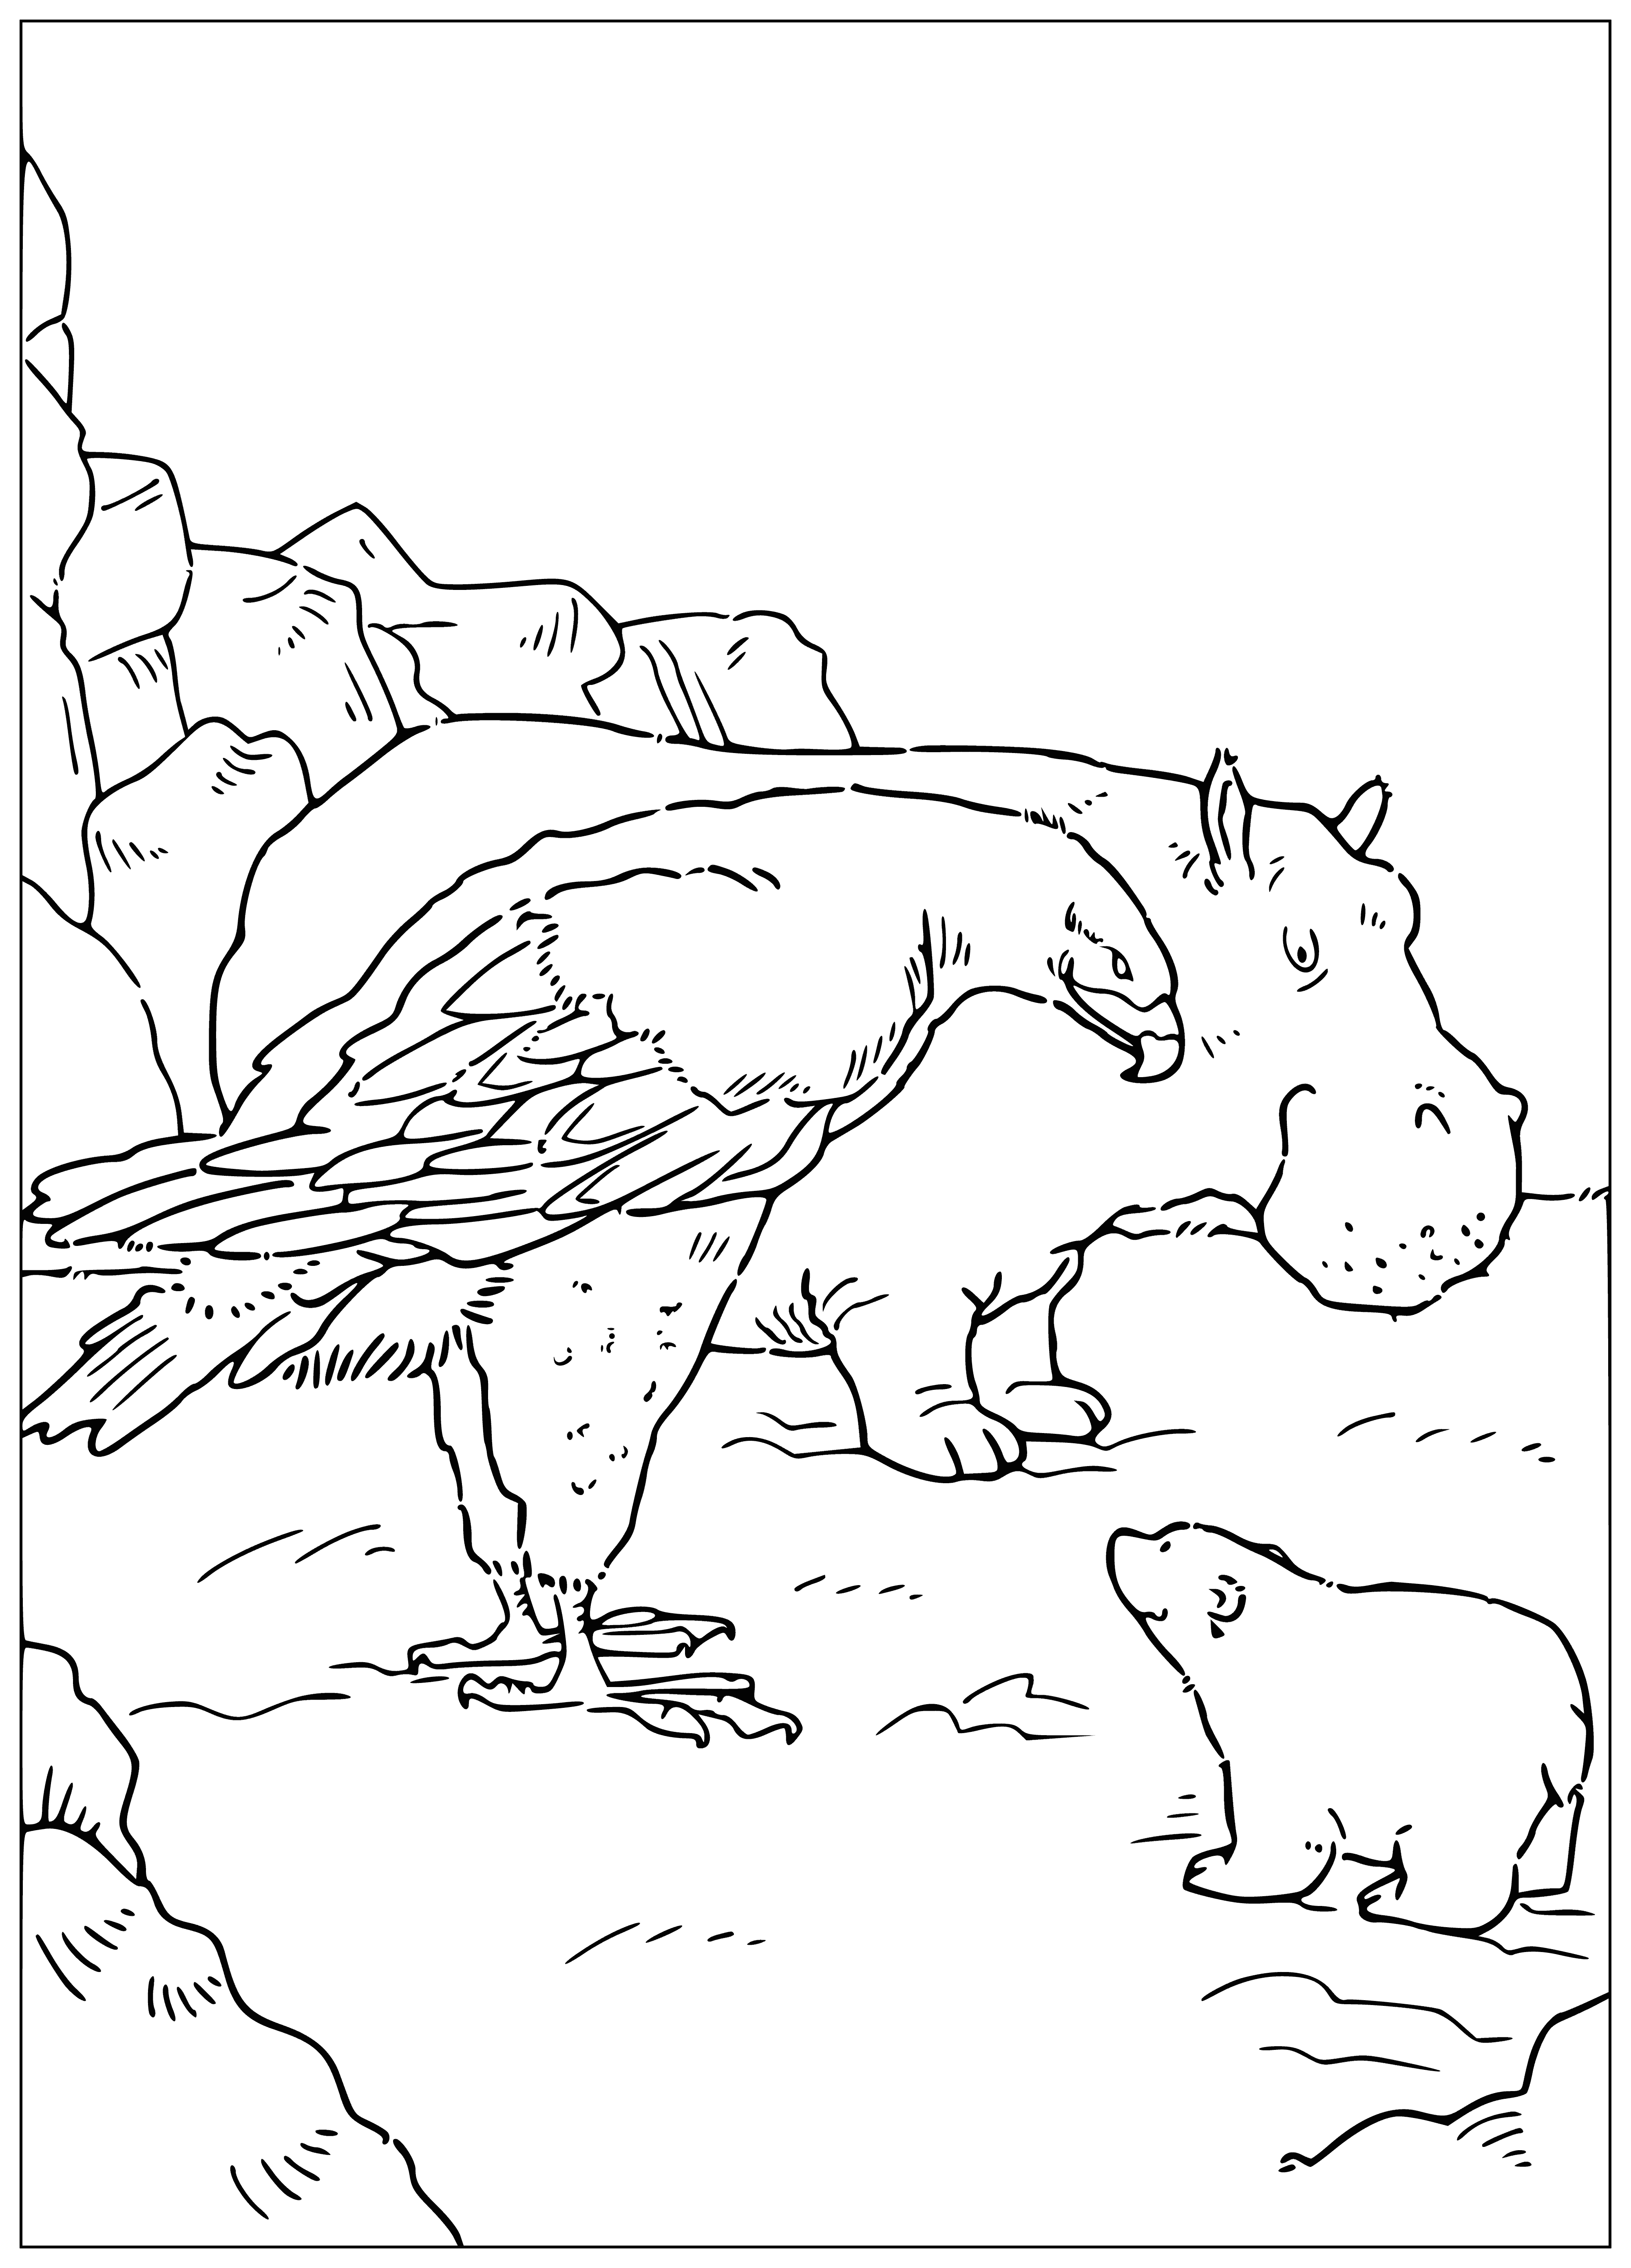 coloring page: Small polar bear stands on rock looking up at flying eagle with a fish in its talons. #coloringpage #bears #eagles